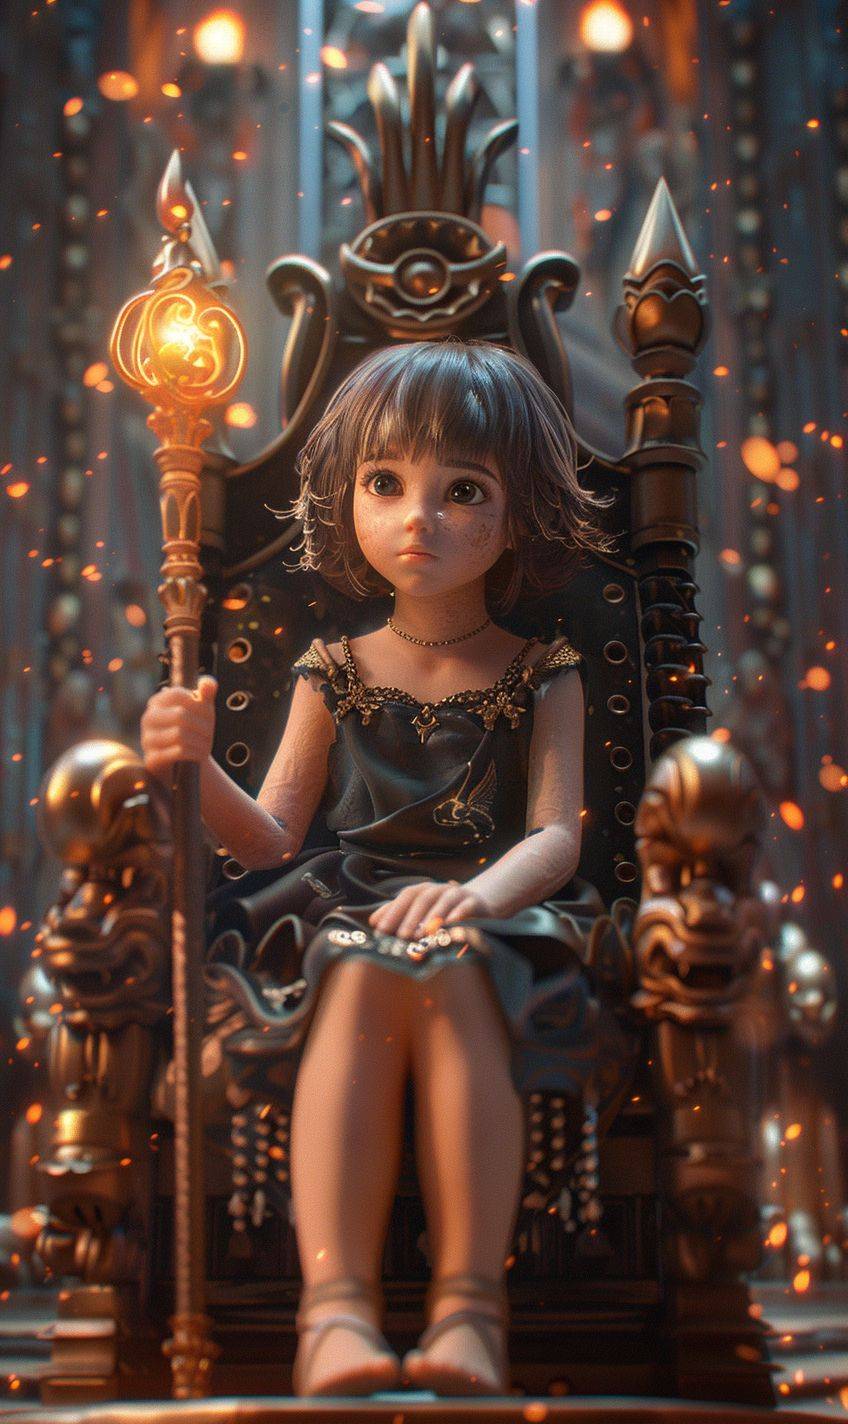 A three-year-old girl with smooth brown hair, cut into a pixie cut and without ponytails, sitting with a serious face on a high pedestal in an ancient temple, on a throne with a magical, glowing staff in her hand. The girl looks funny and cute in a Pixar fairytale style.